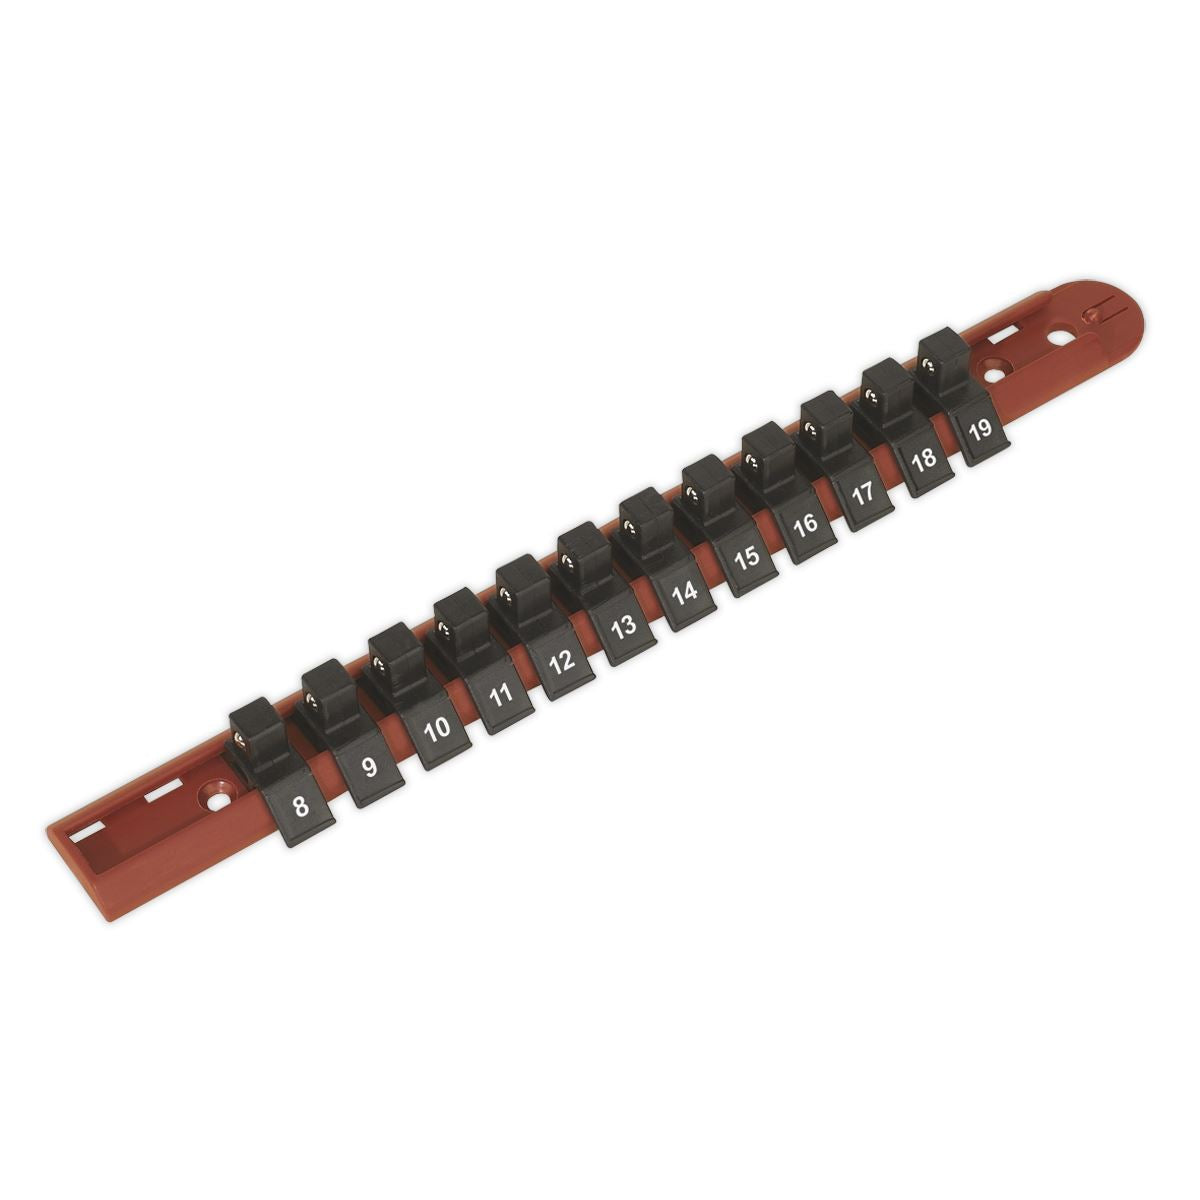 Sealey Premier Socket Retaining Rail with 12 Clips 3/8"Sq Drive